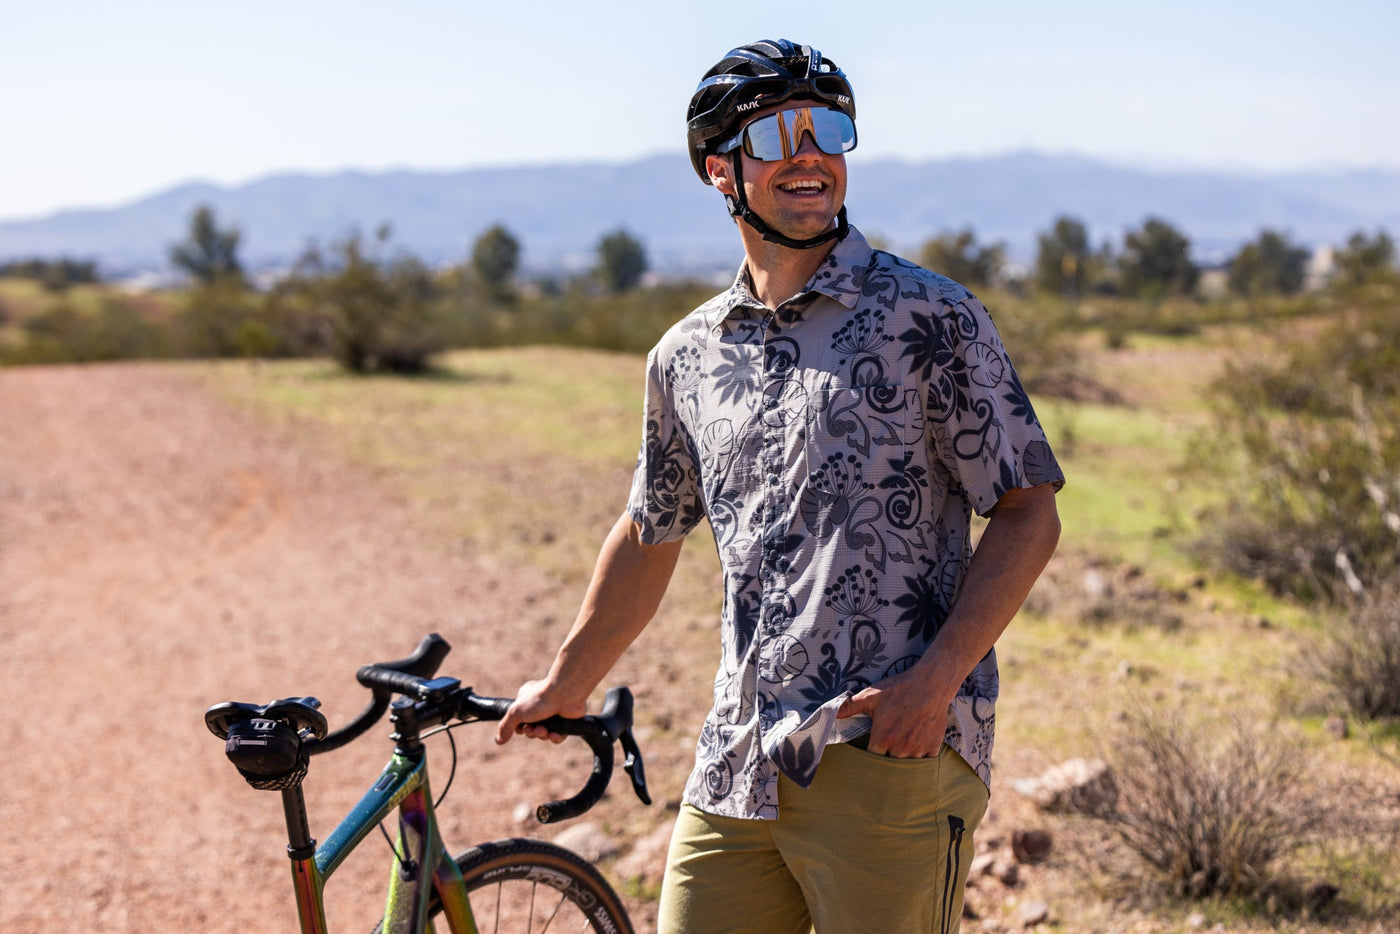 Men's Recycled Collection - Club Ride Apparel